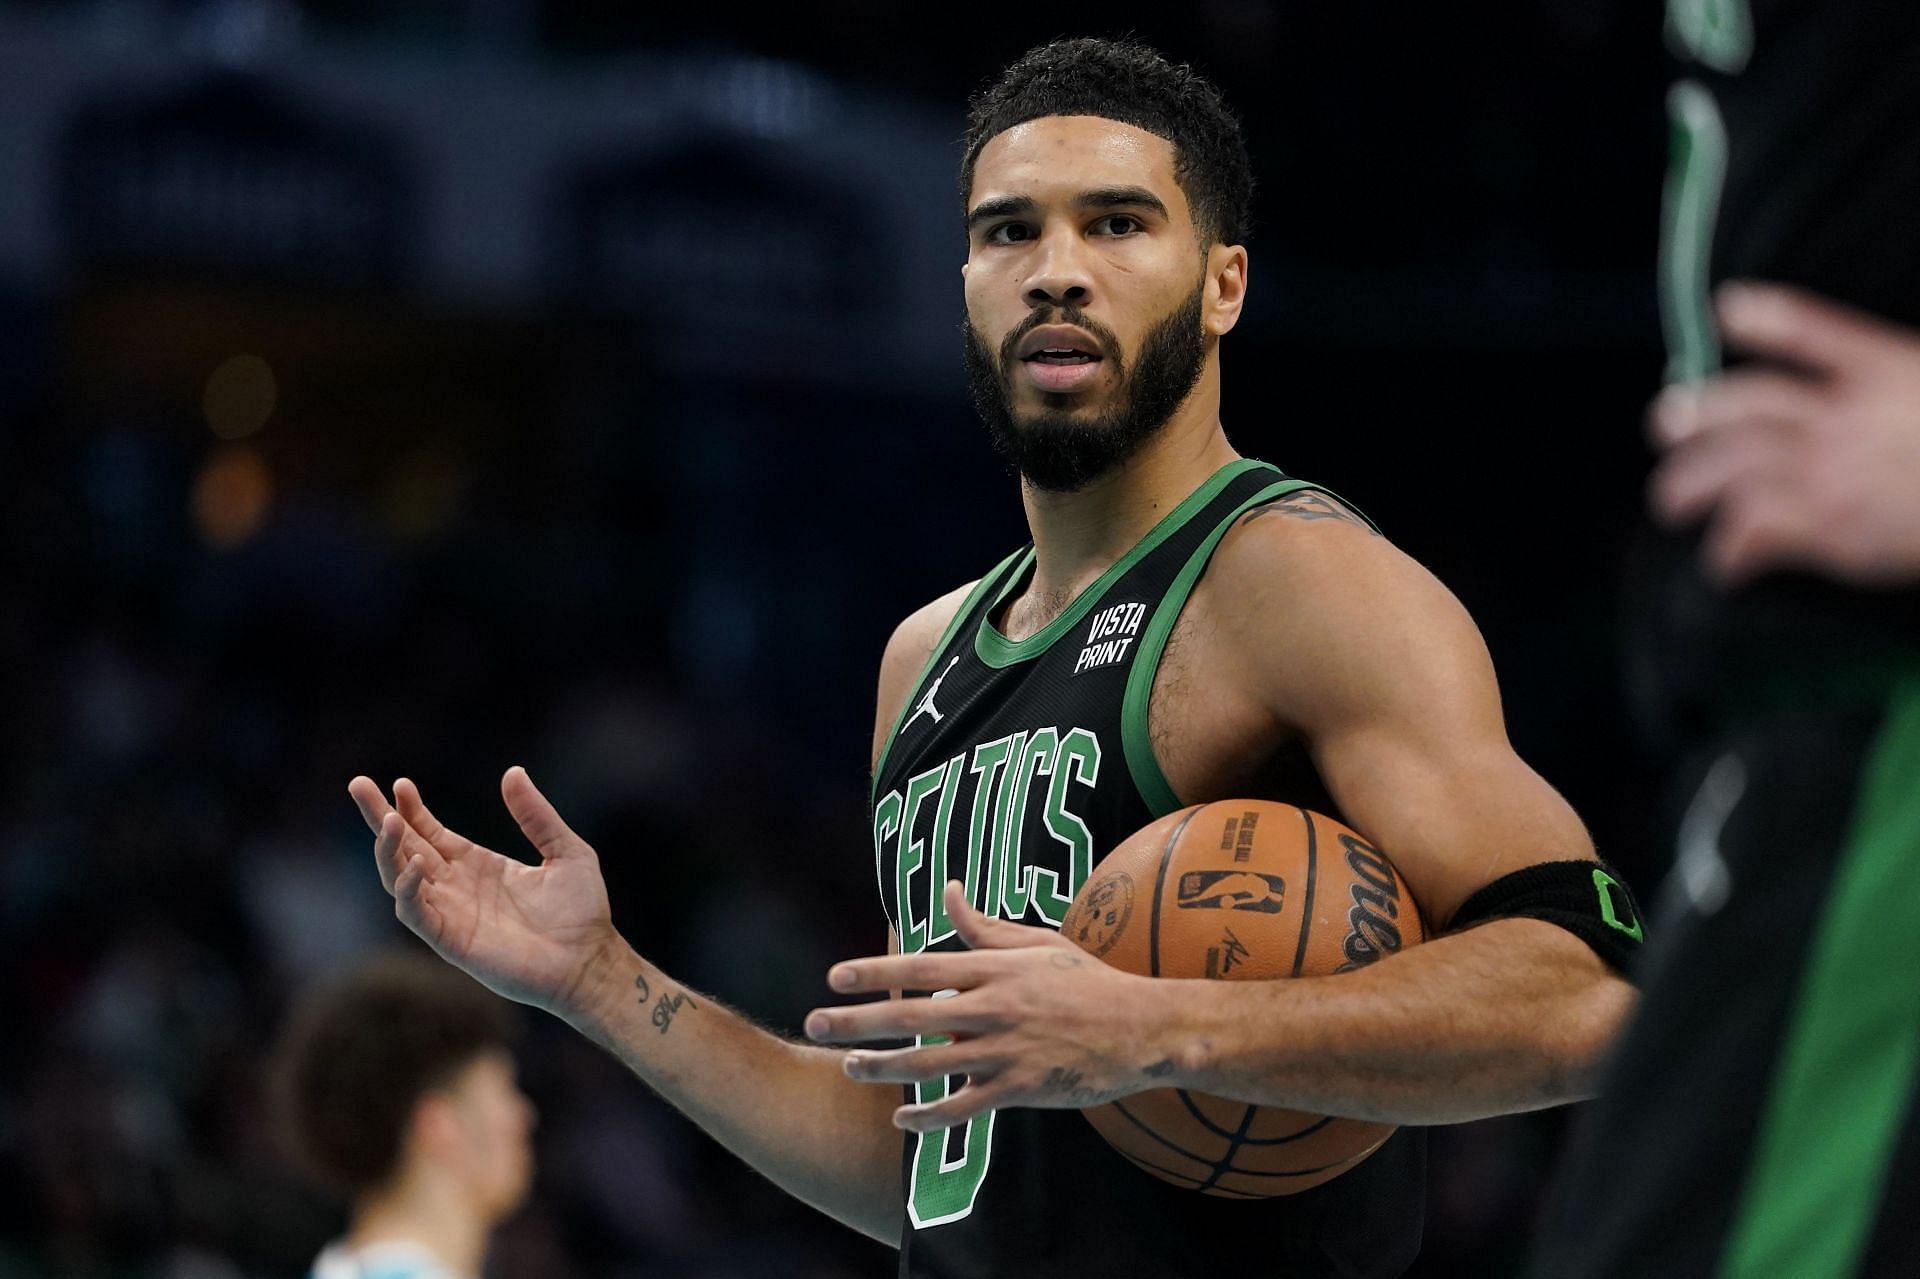 Why did Jayson Tatum get ejected against Sixers?